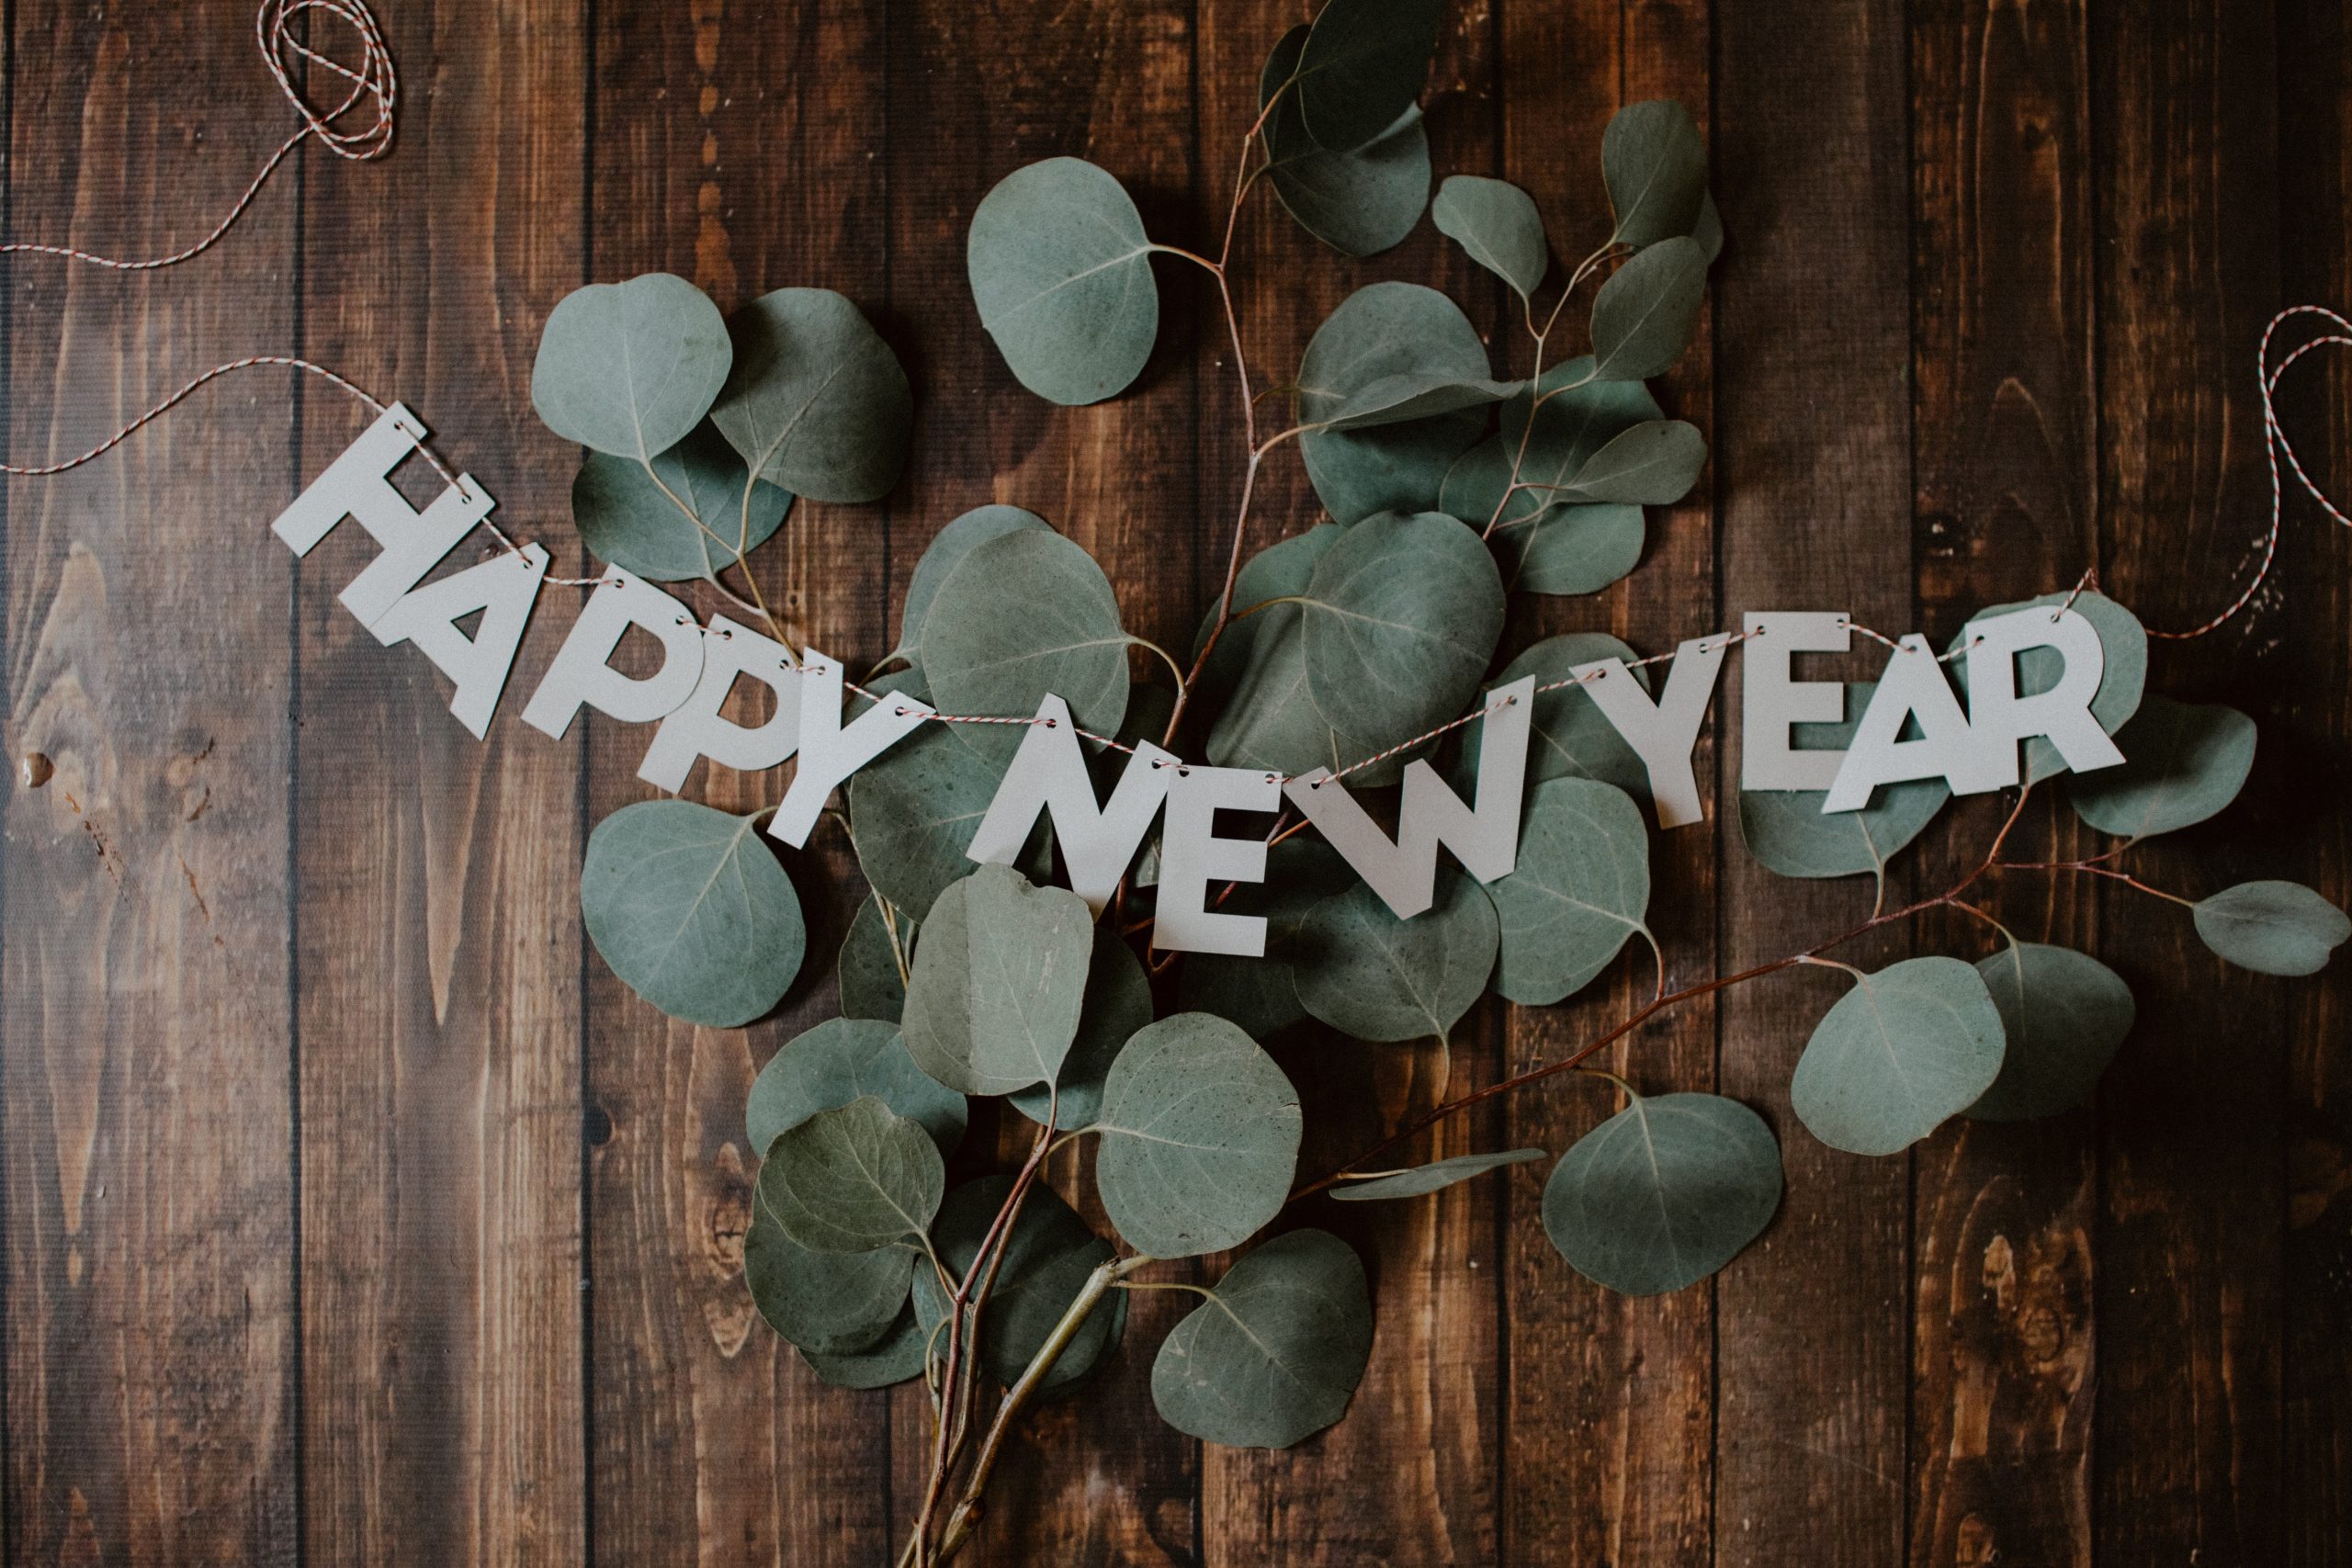 A Happy New Years sign, photo by Kelly Sikkema via Unsplash.